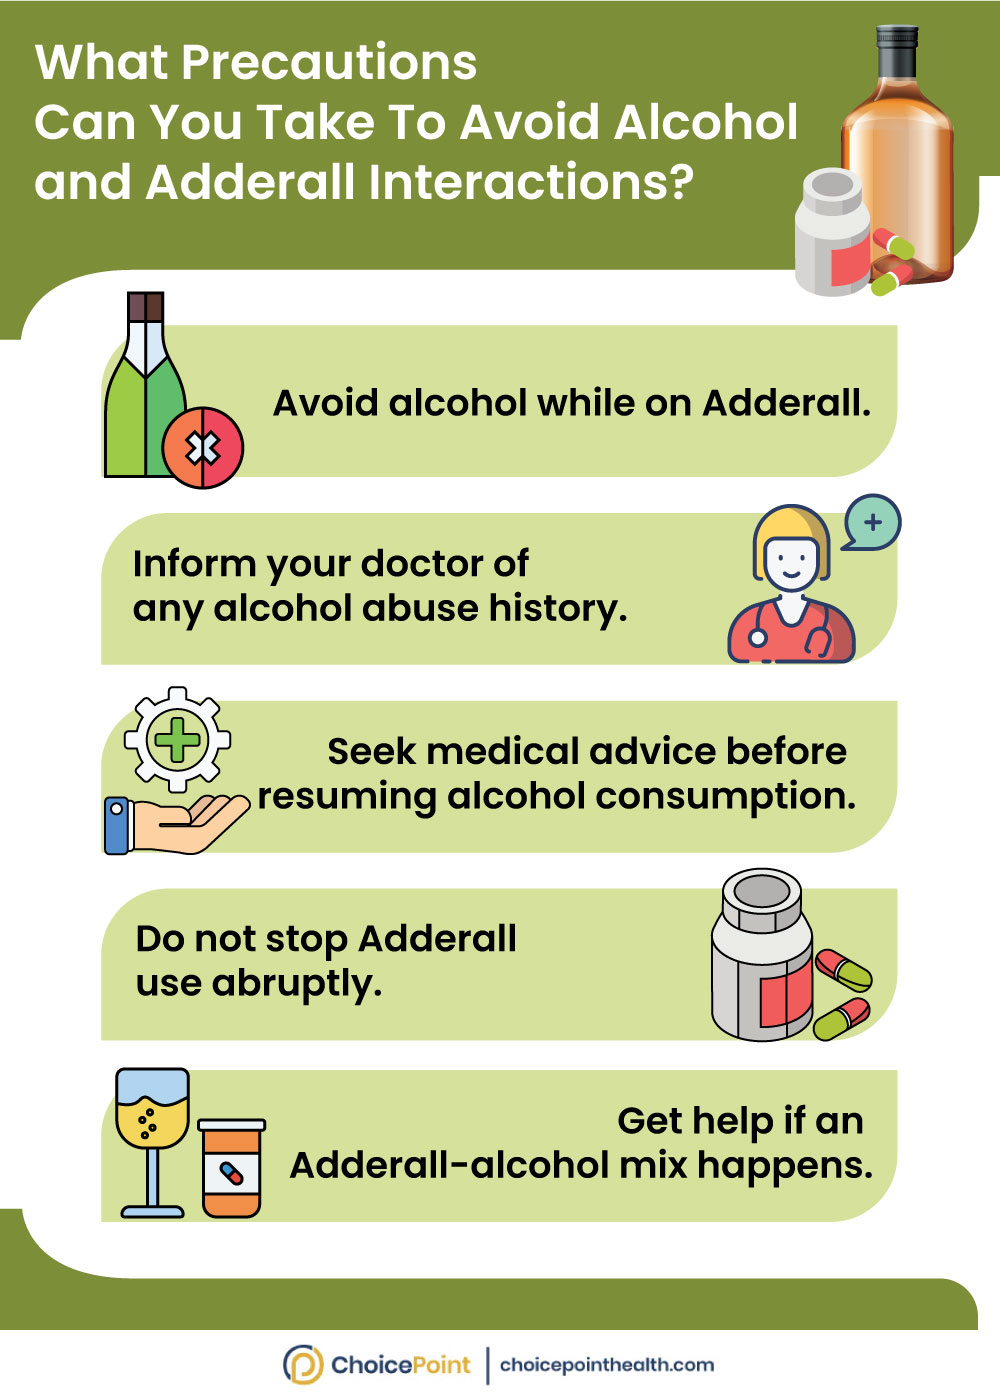 Should You Avoid Alcohol When Taking Adderall?